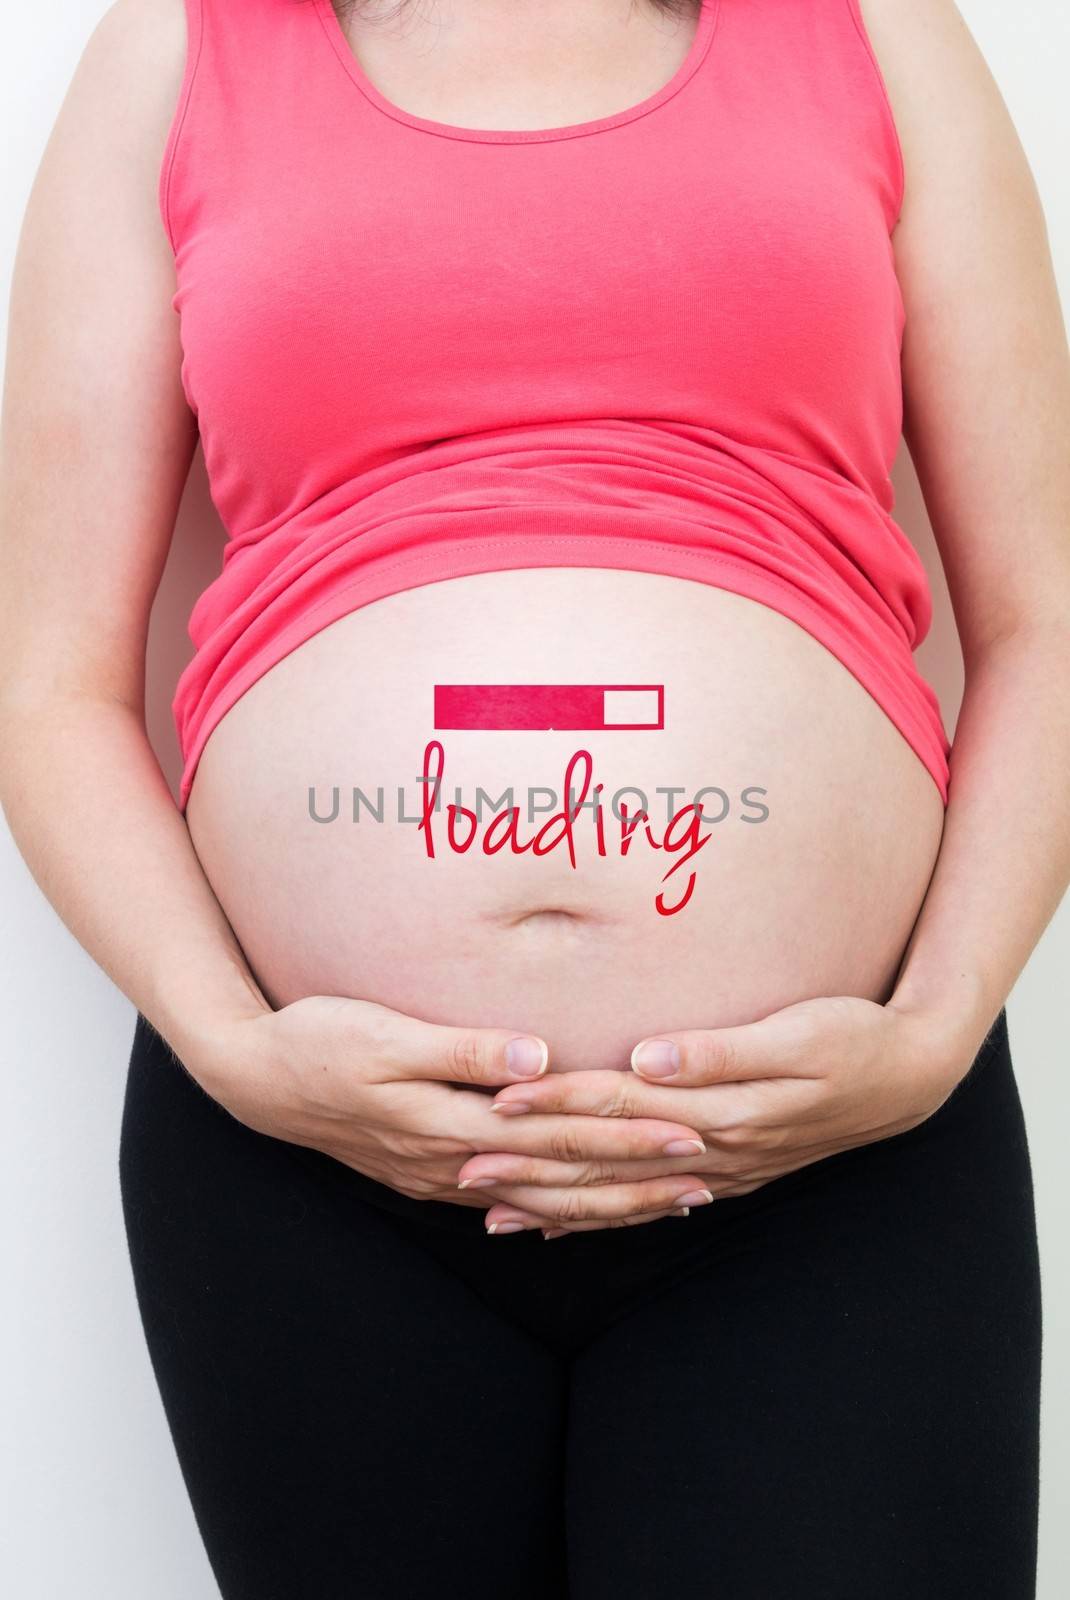 Pregnant woman with loading concept painted on her belly